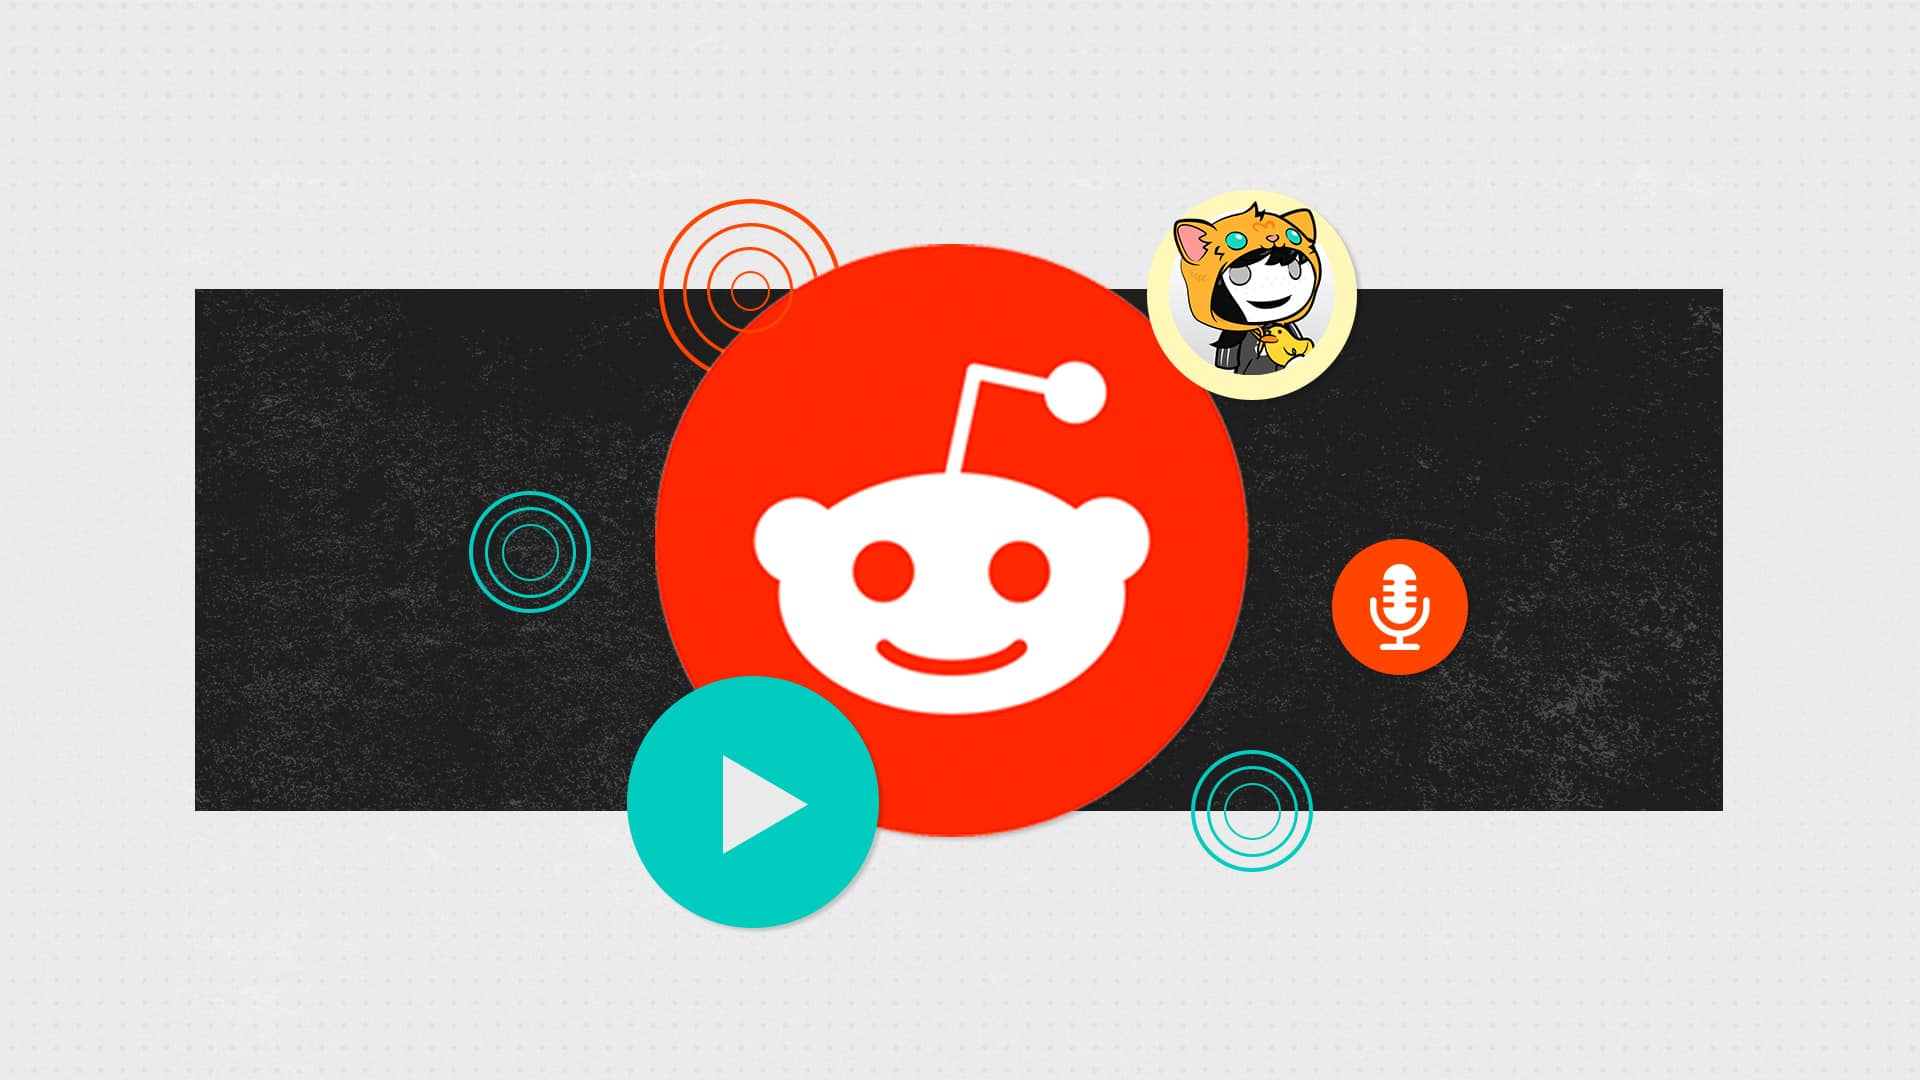 Reddit Competes With Meta and TikTok For Digital Supremacy